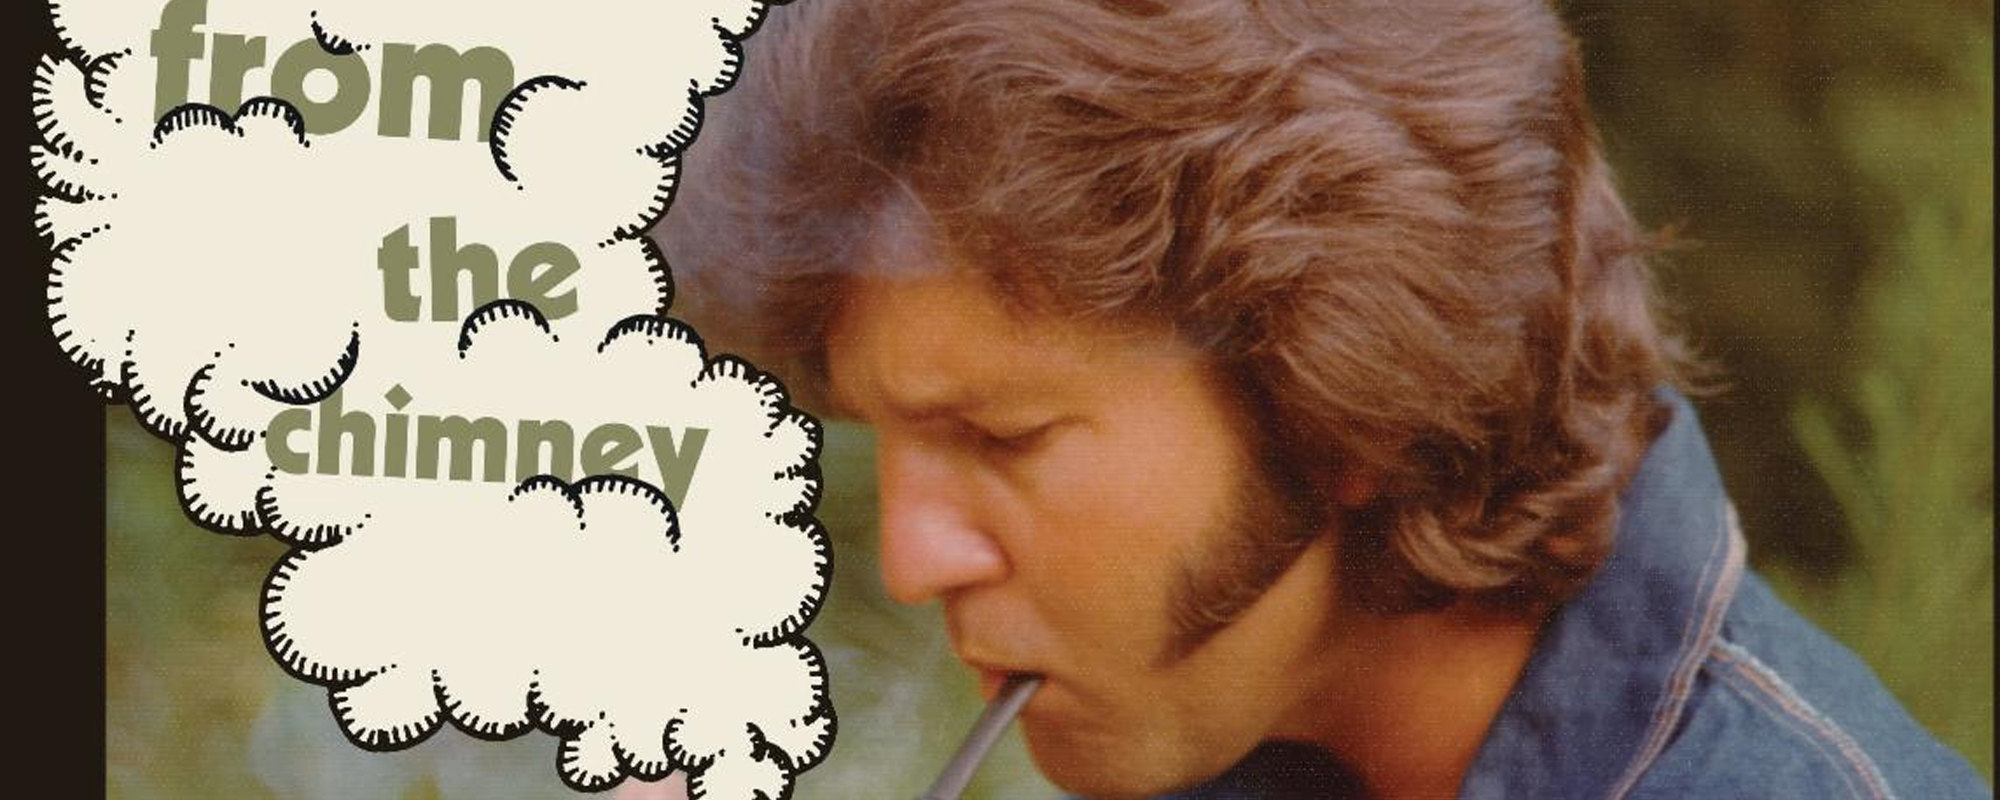 Review: Dan Auerbach Pays Tribute to Tony Joe White with ‘Smoke from the Chimney’